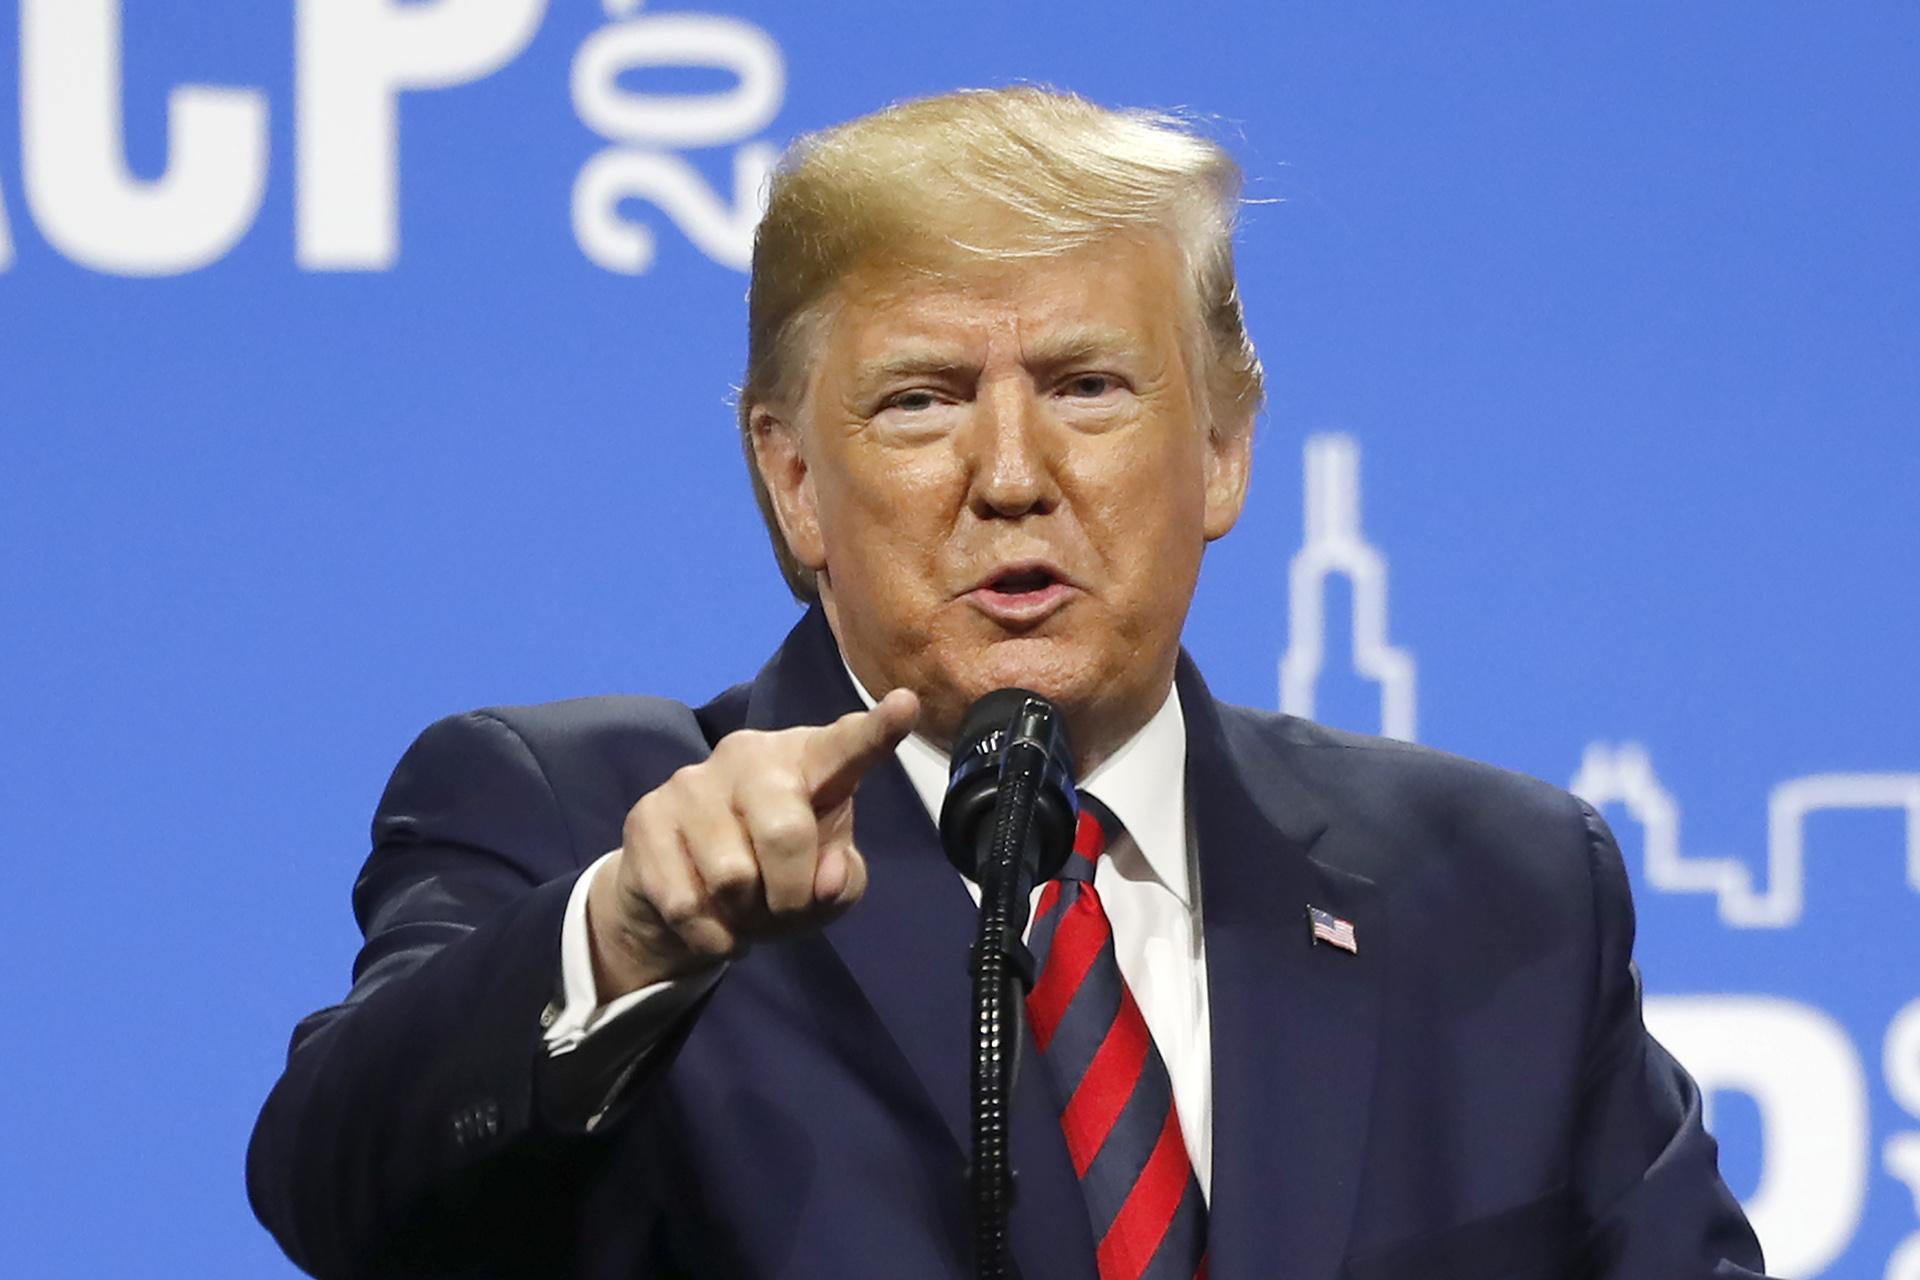 President Donald Trump speaks at the International Association of Chiefs of Police Convention Monday, Oct. 28, 2019, in Chicago. (AP Photo / Charles Rex Arbogast)